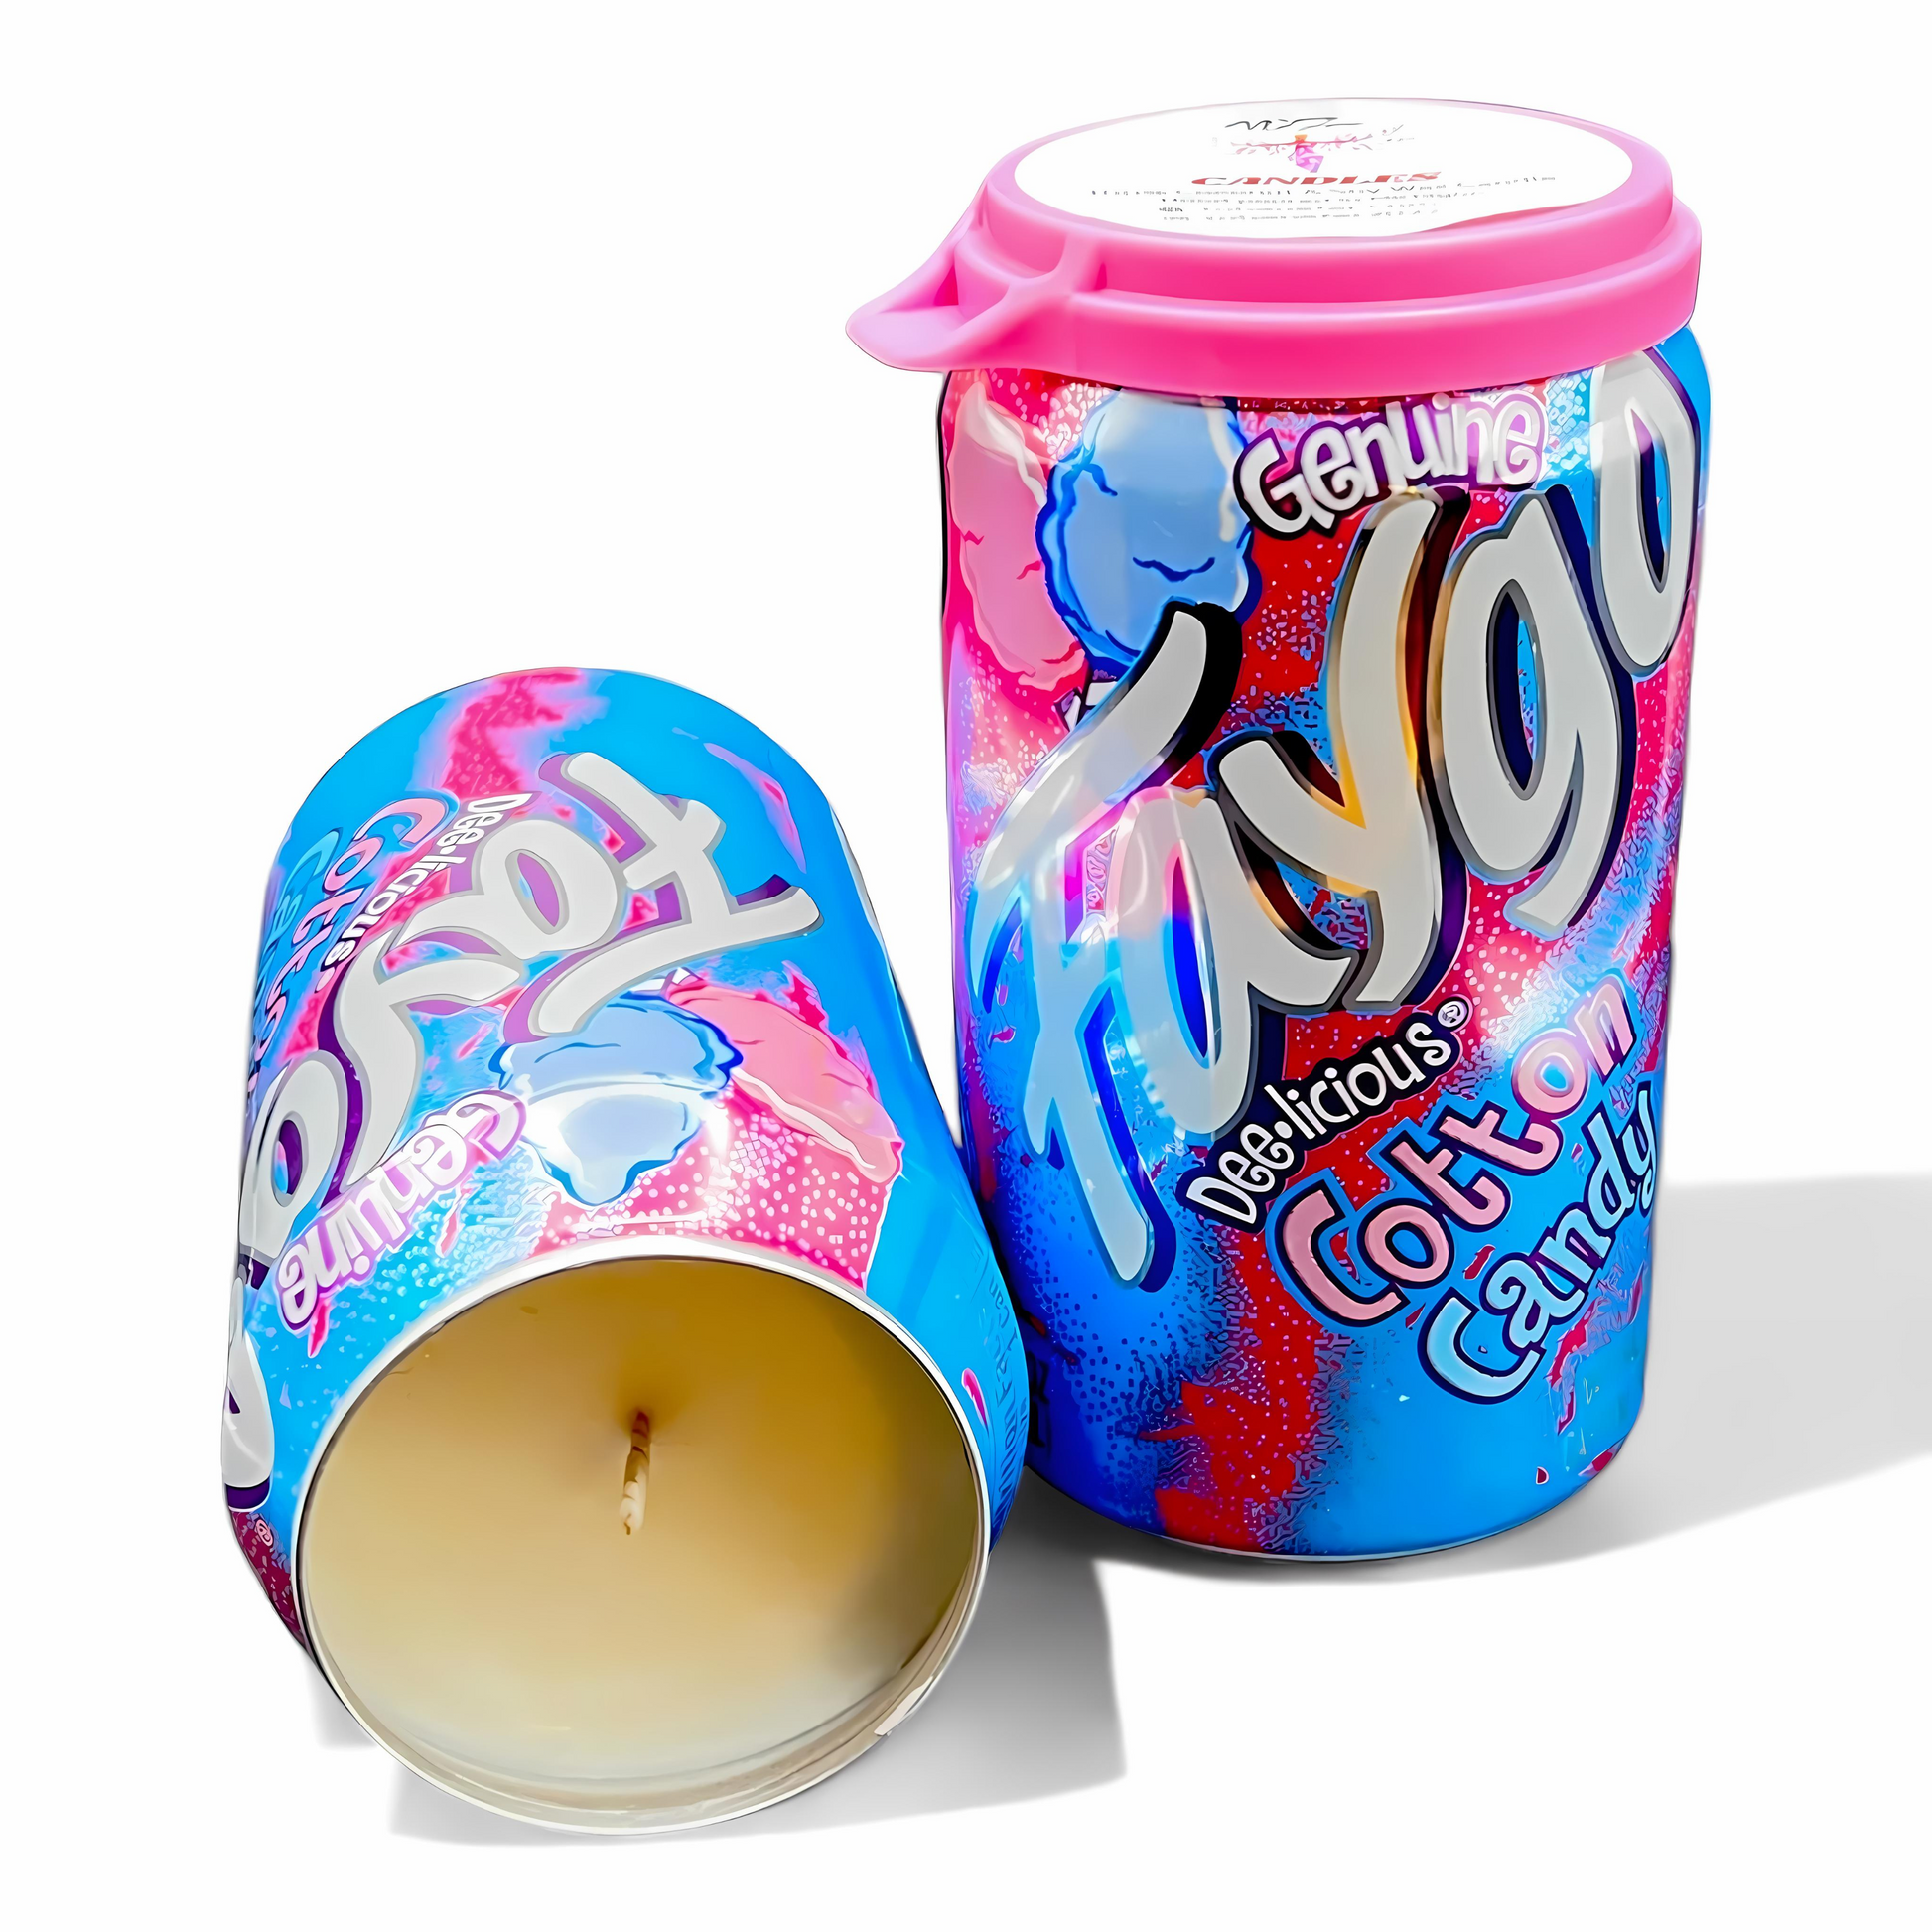 Faygo Cotton Candy Can Candle